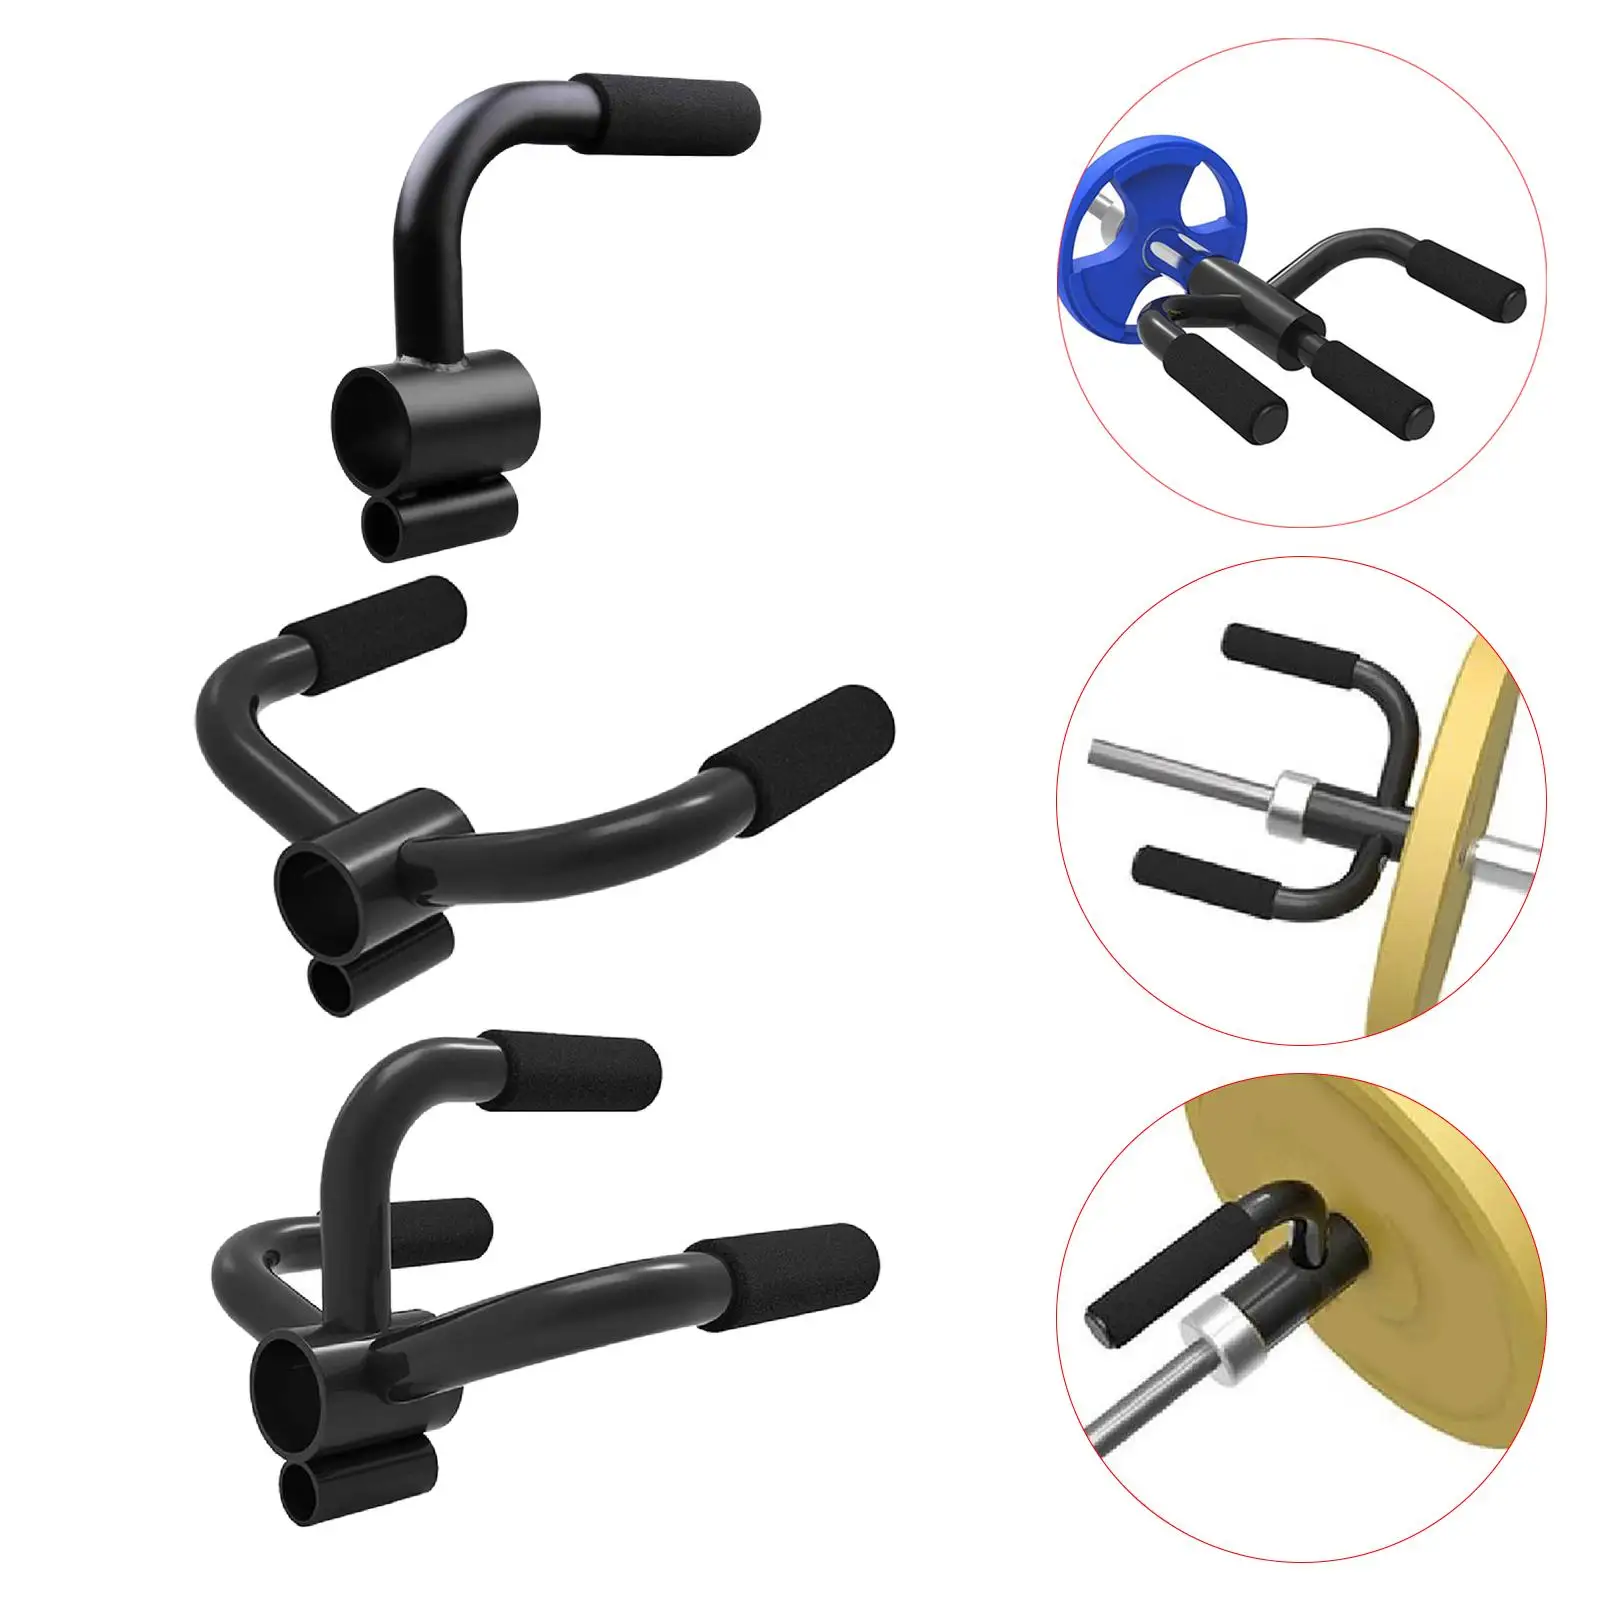 T Bar Row Landmine Attachment Exercise Barbell Post Insert with Rubber Grip for Full Body Triceps Biceps Weight Lifting Barbell